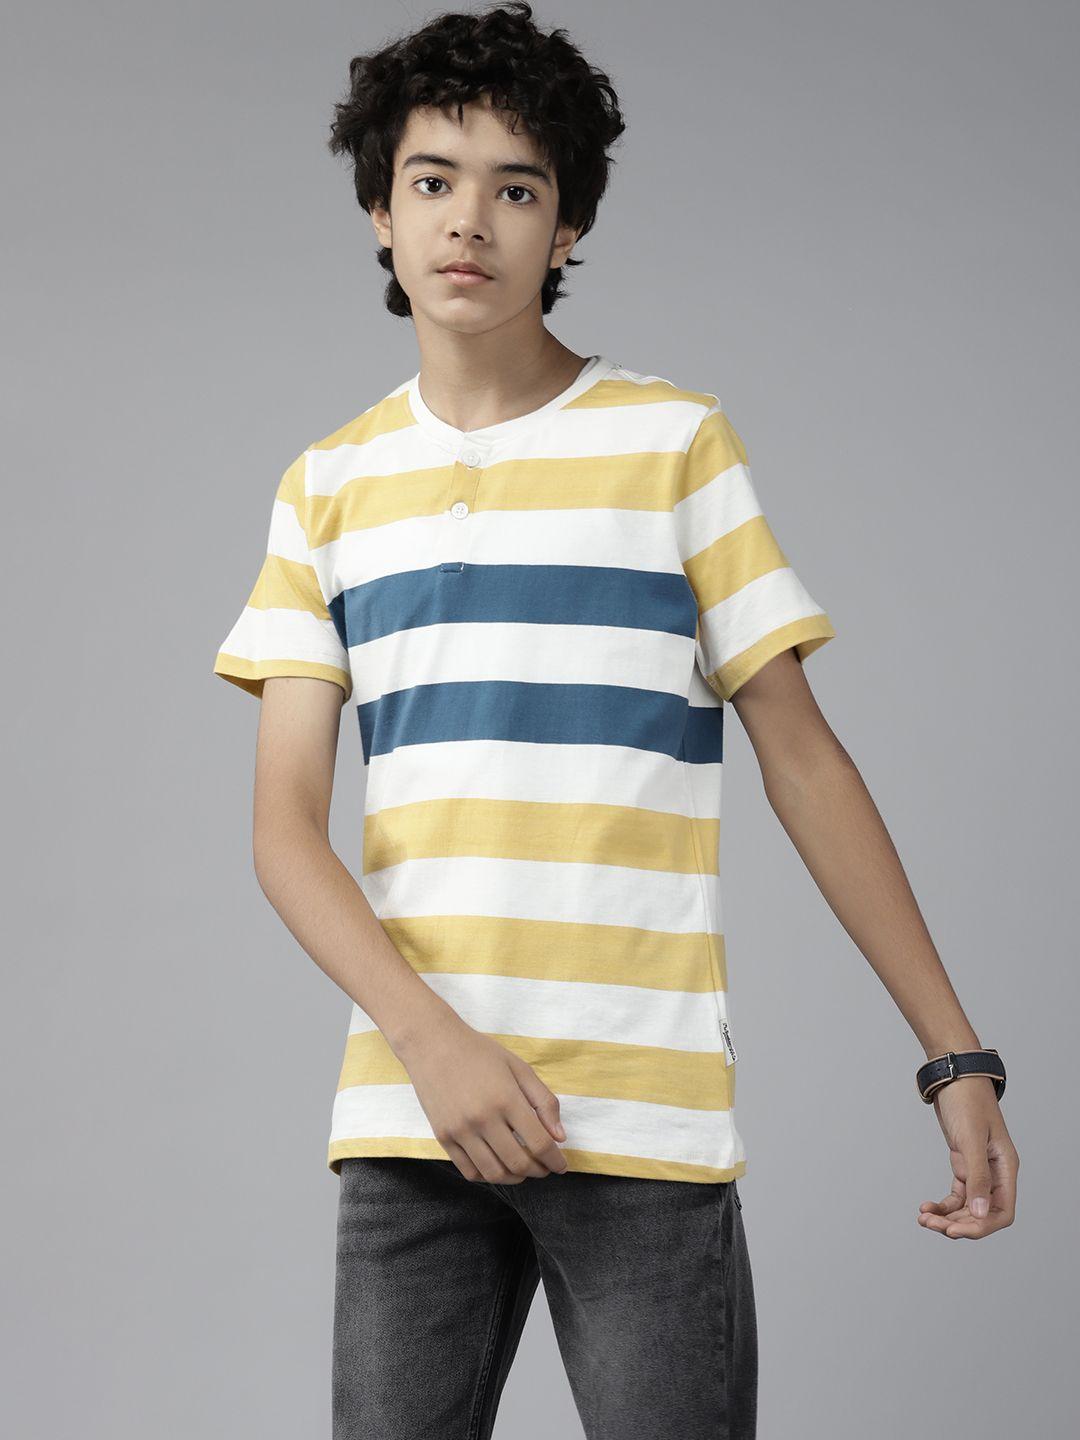 uth by roadster boys white & beige striped henley neck pure cotton t-shirt